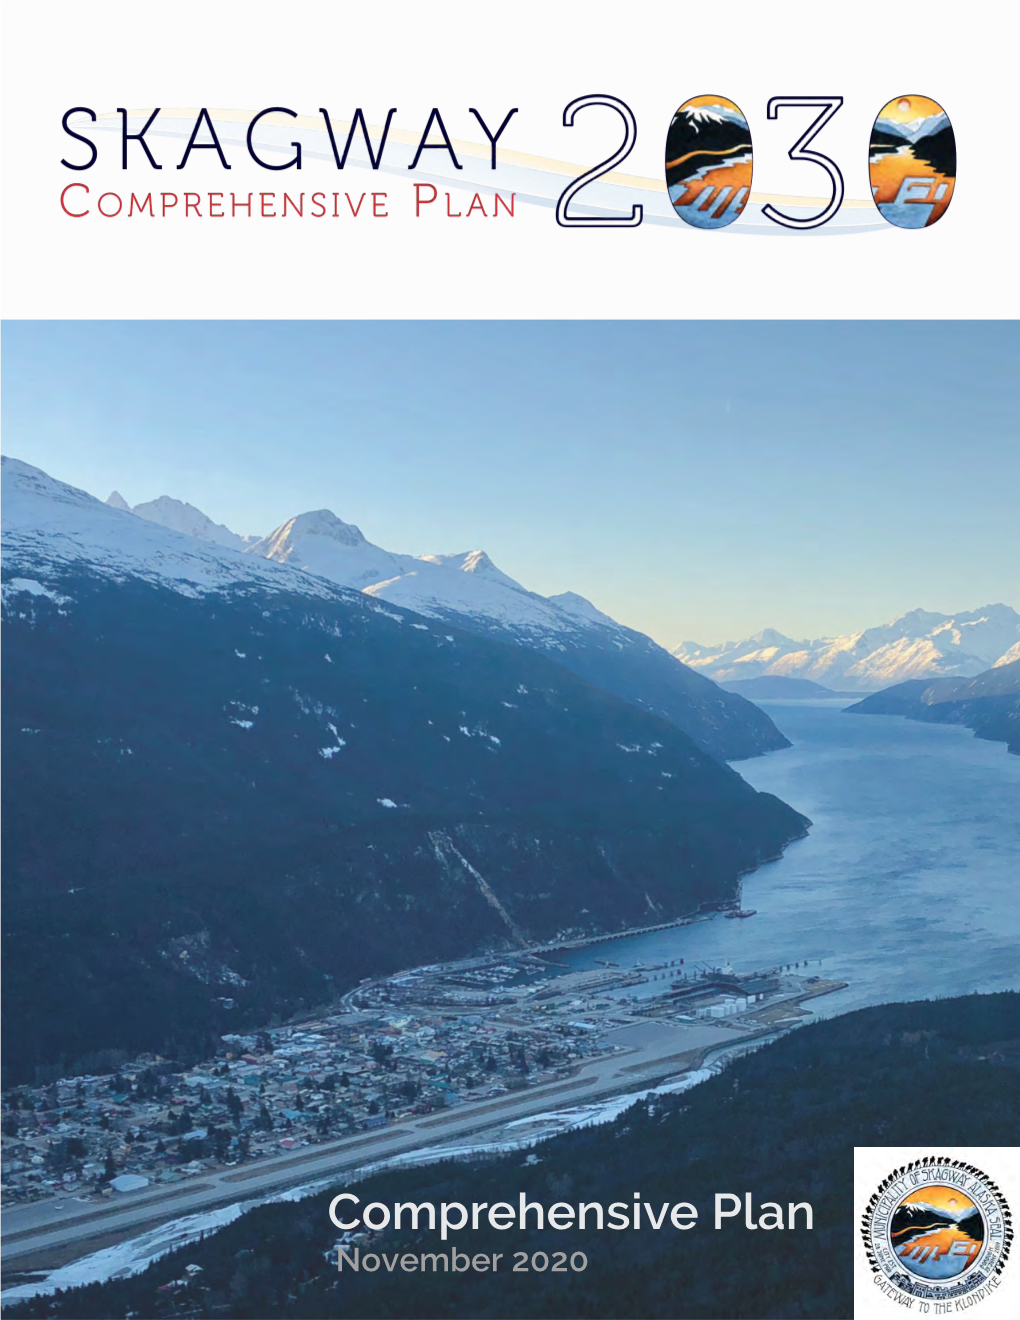 Skagway 2030 Comprehensive Plan Consulting Team